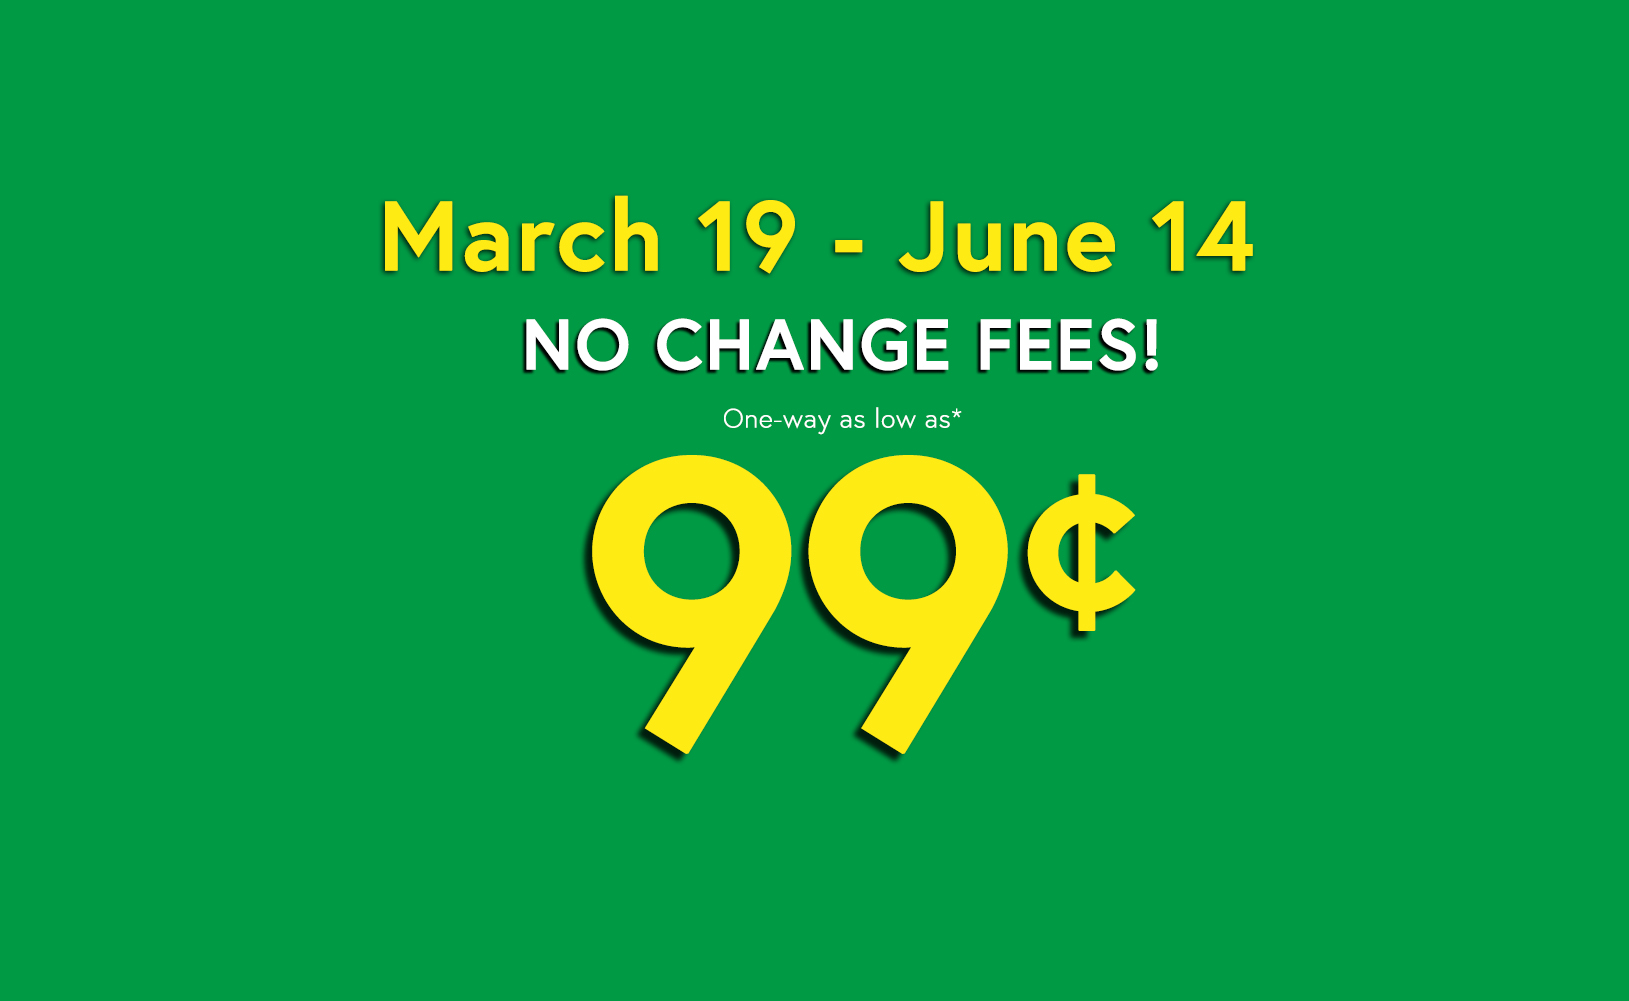 Lowest Fares of the Season!